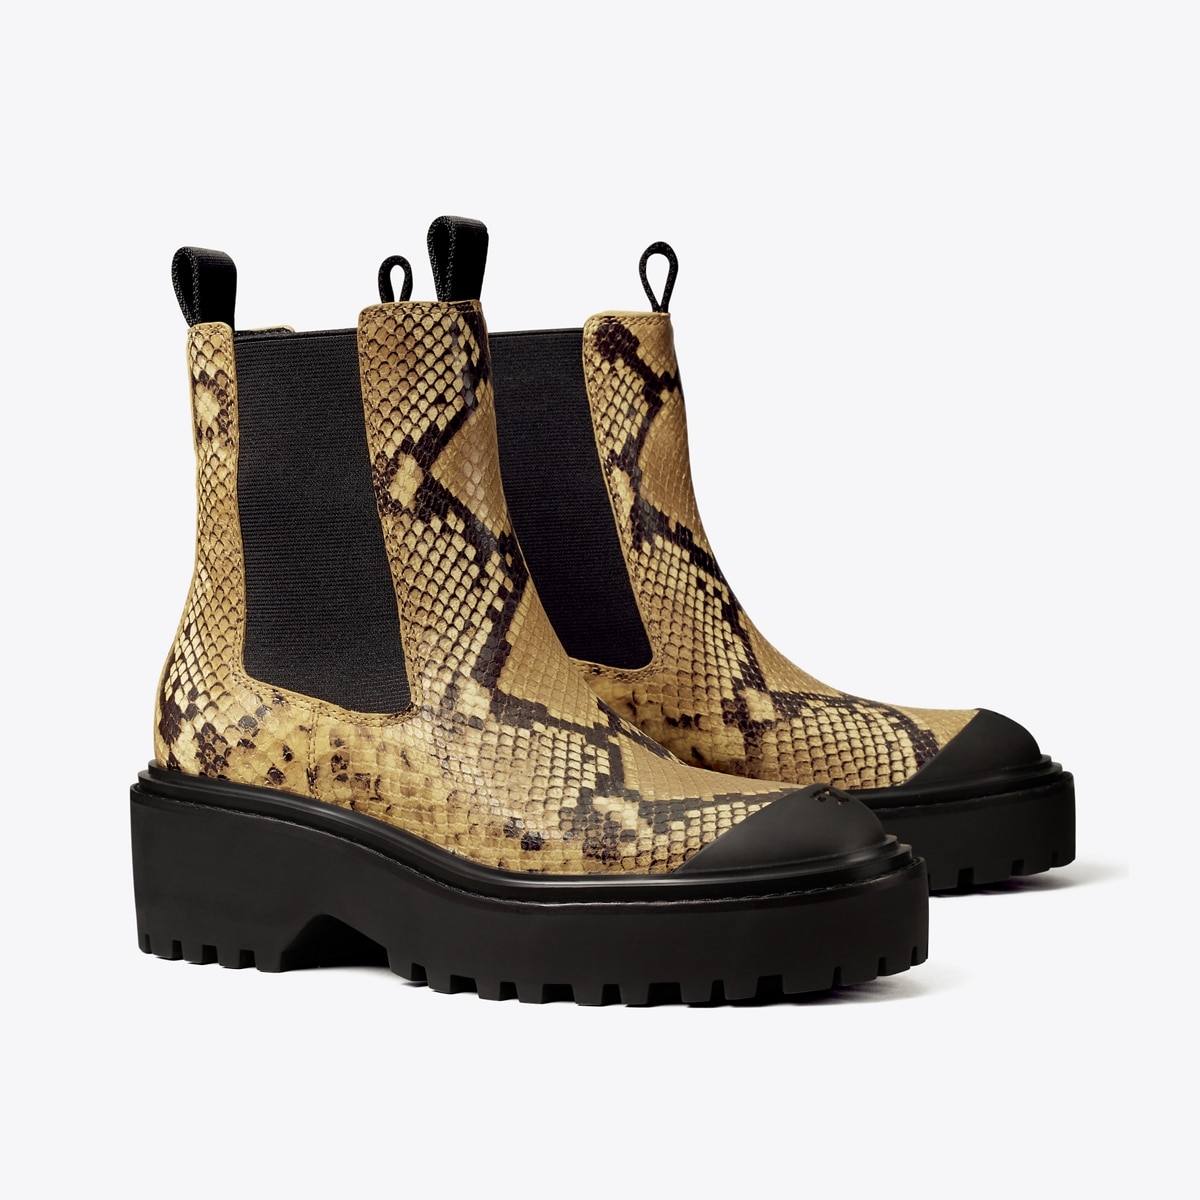 Chelsea Lug-Sole Ankle Boot: Women's Designer Ankle Boots | Tory Burch